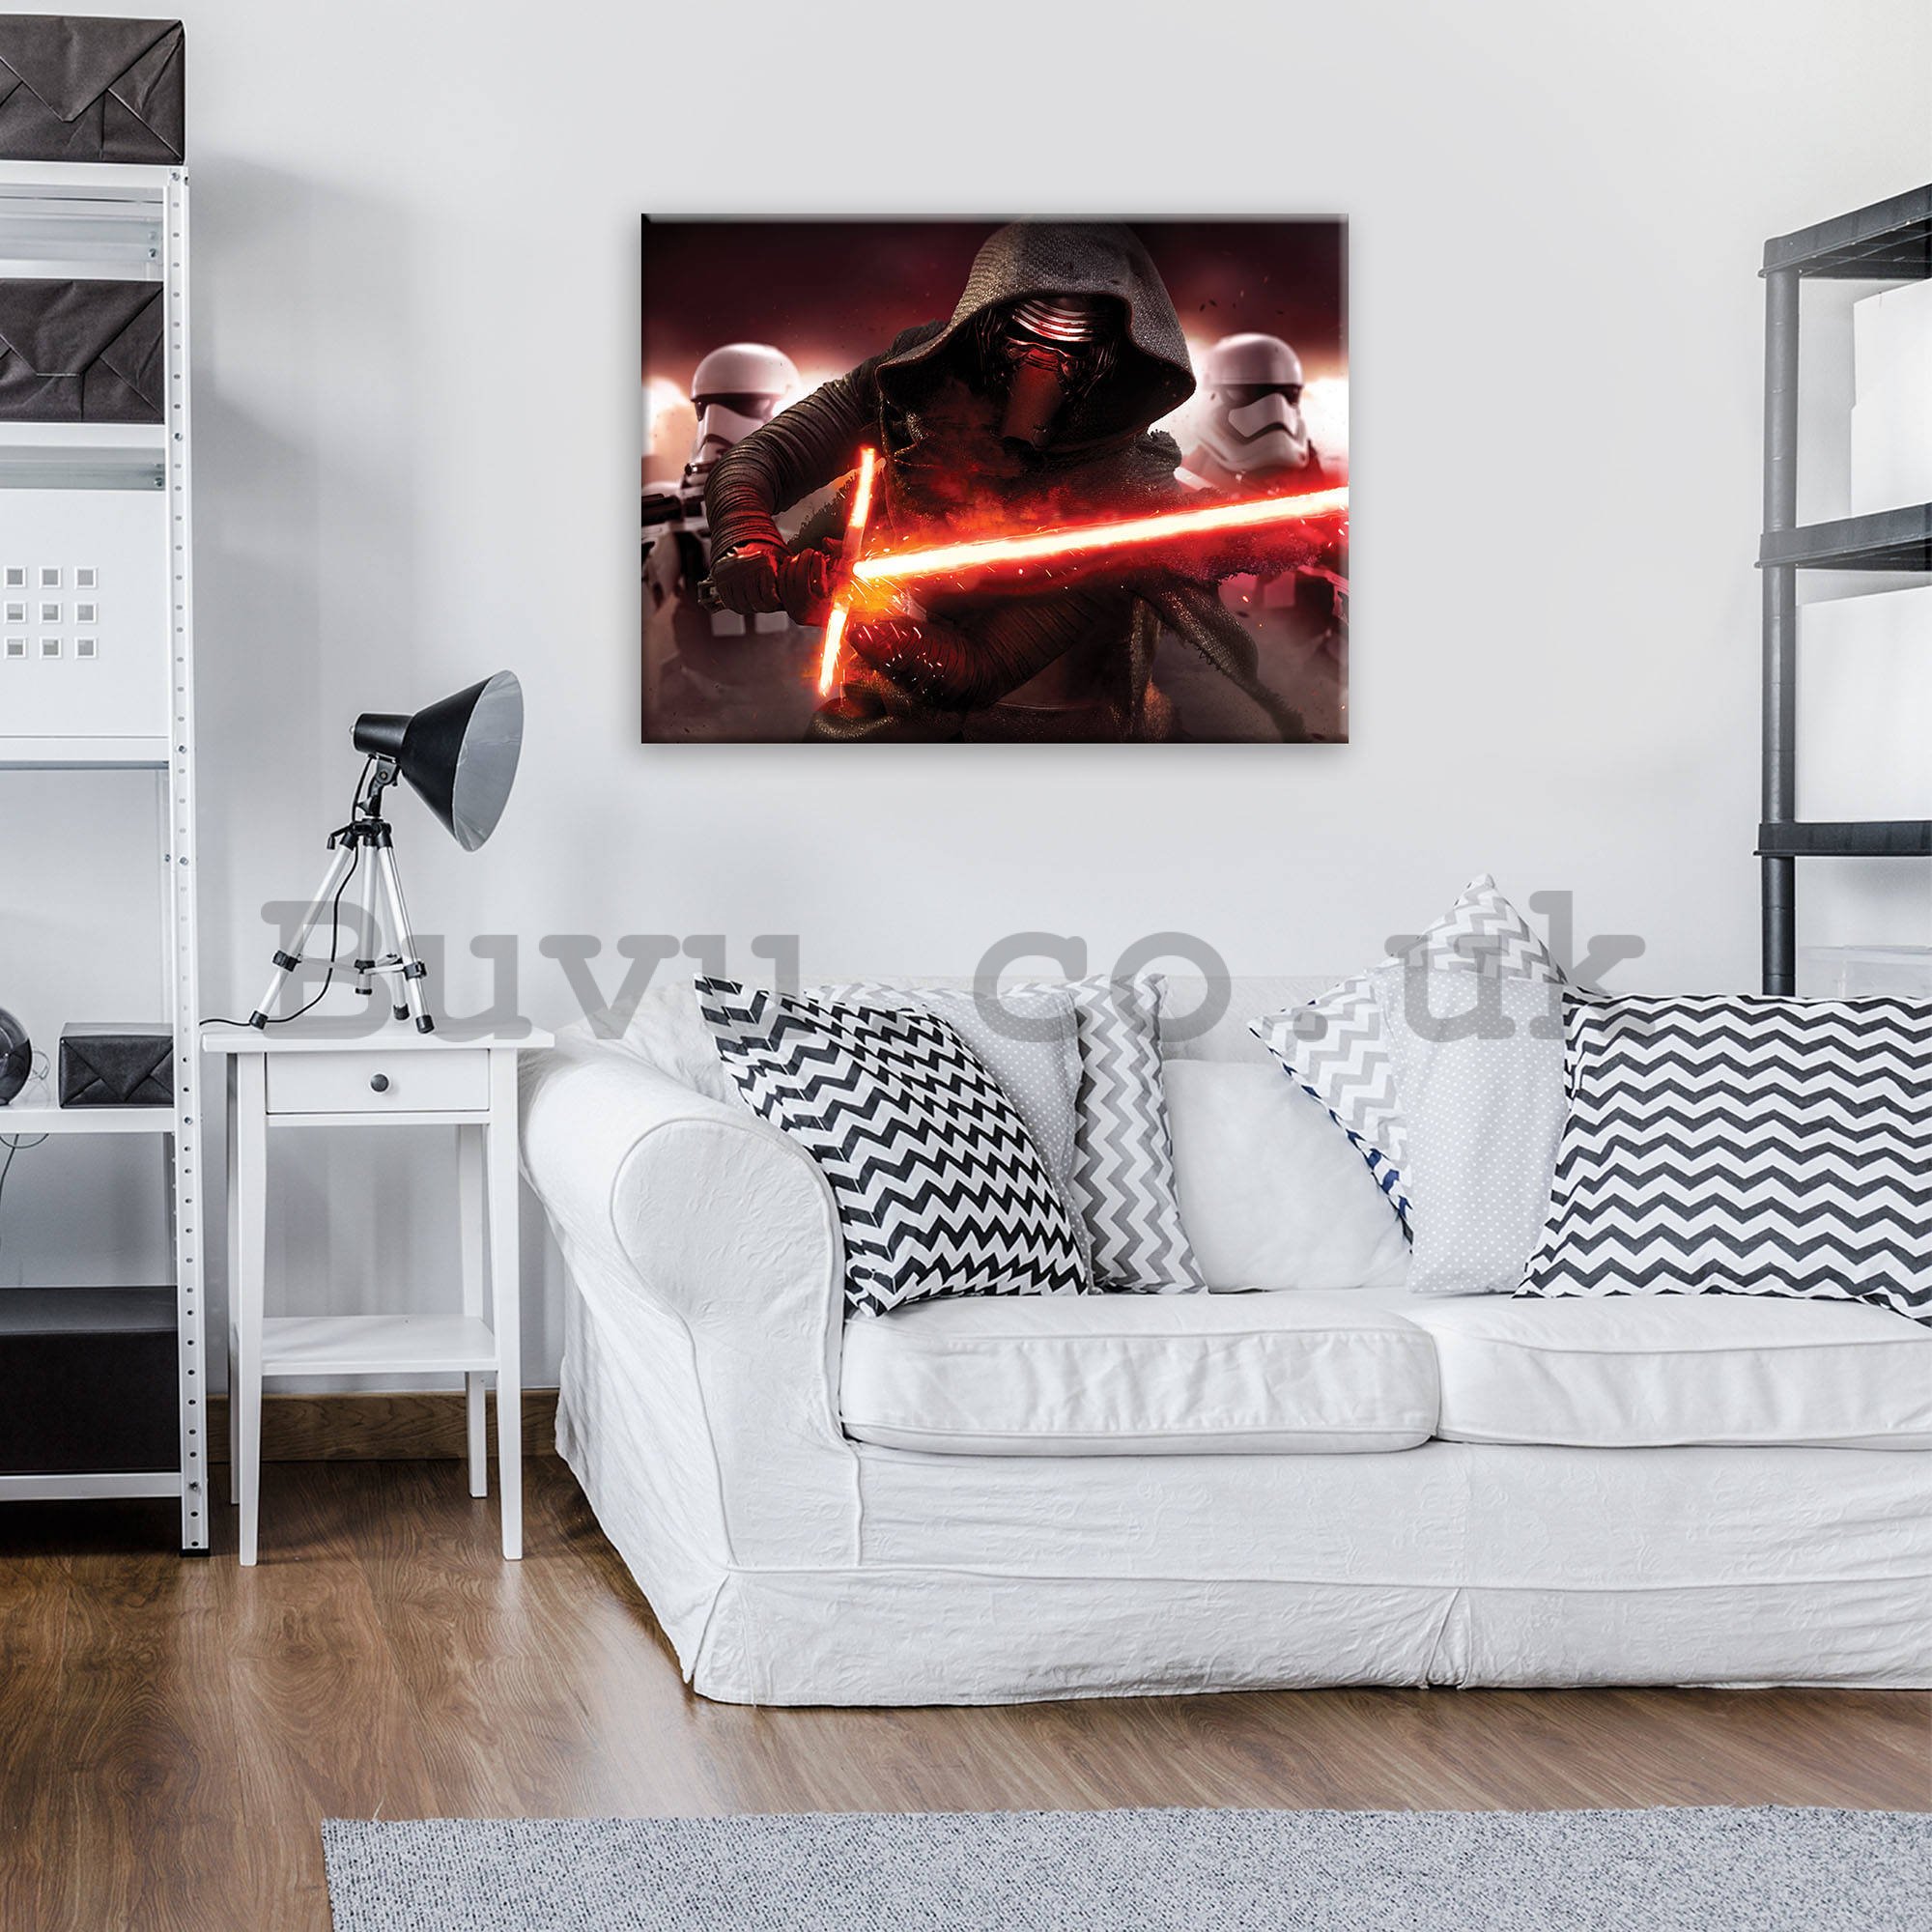 Painting on canvas: Star Wars Kylo Ren's Lightsaber - 80x60 cm